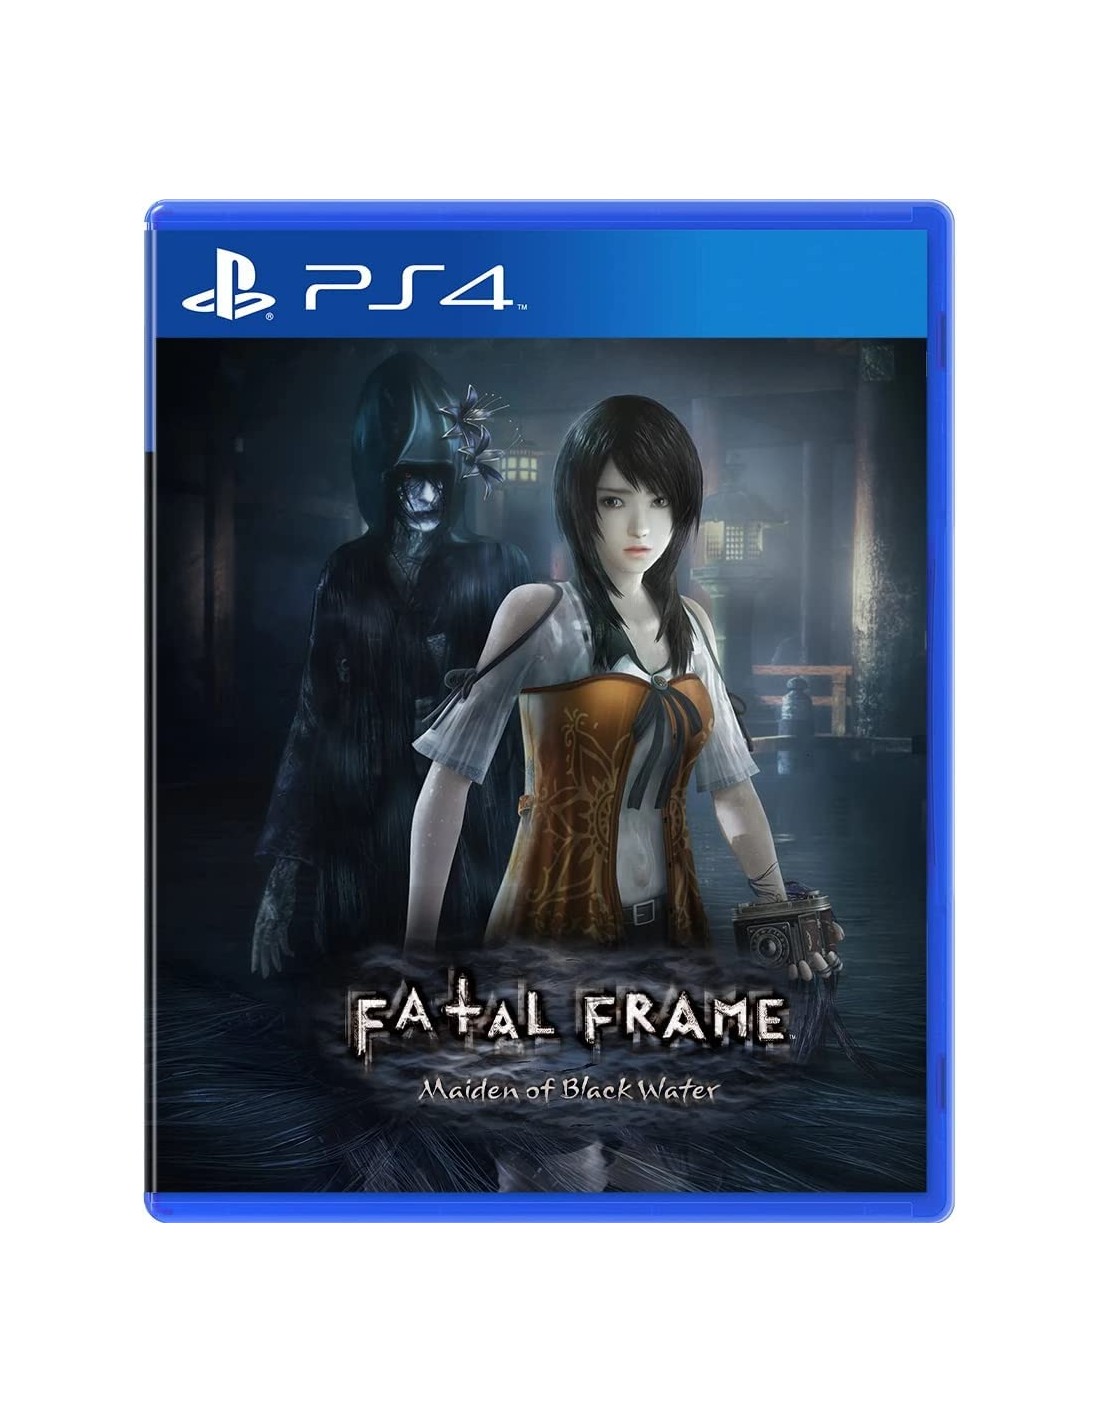 FATAL FRAME MAIDEN OF BLACK WATER PS4